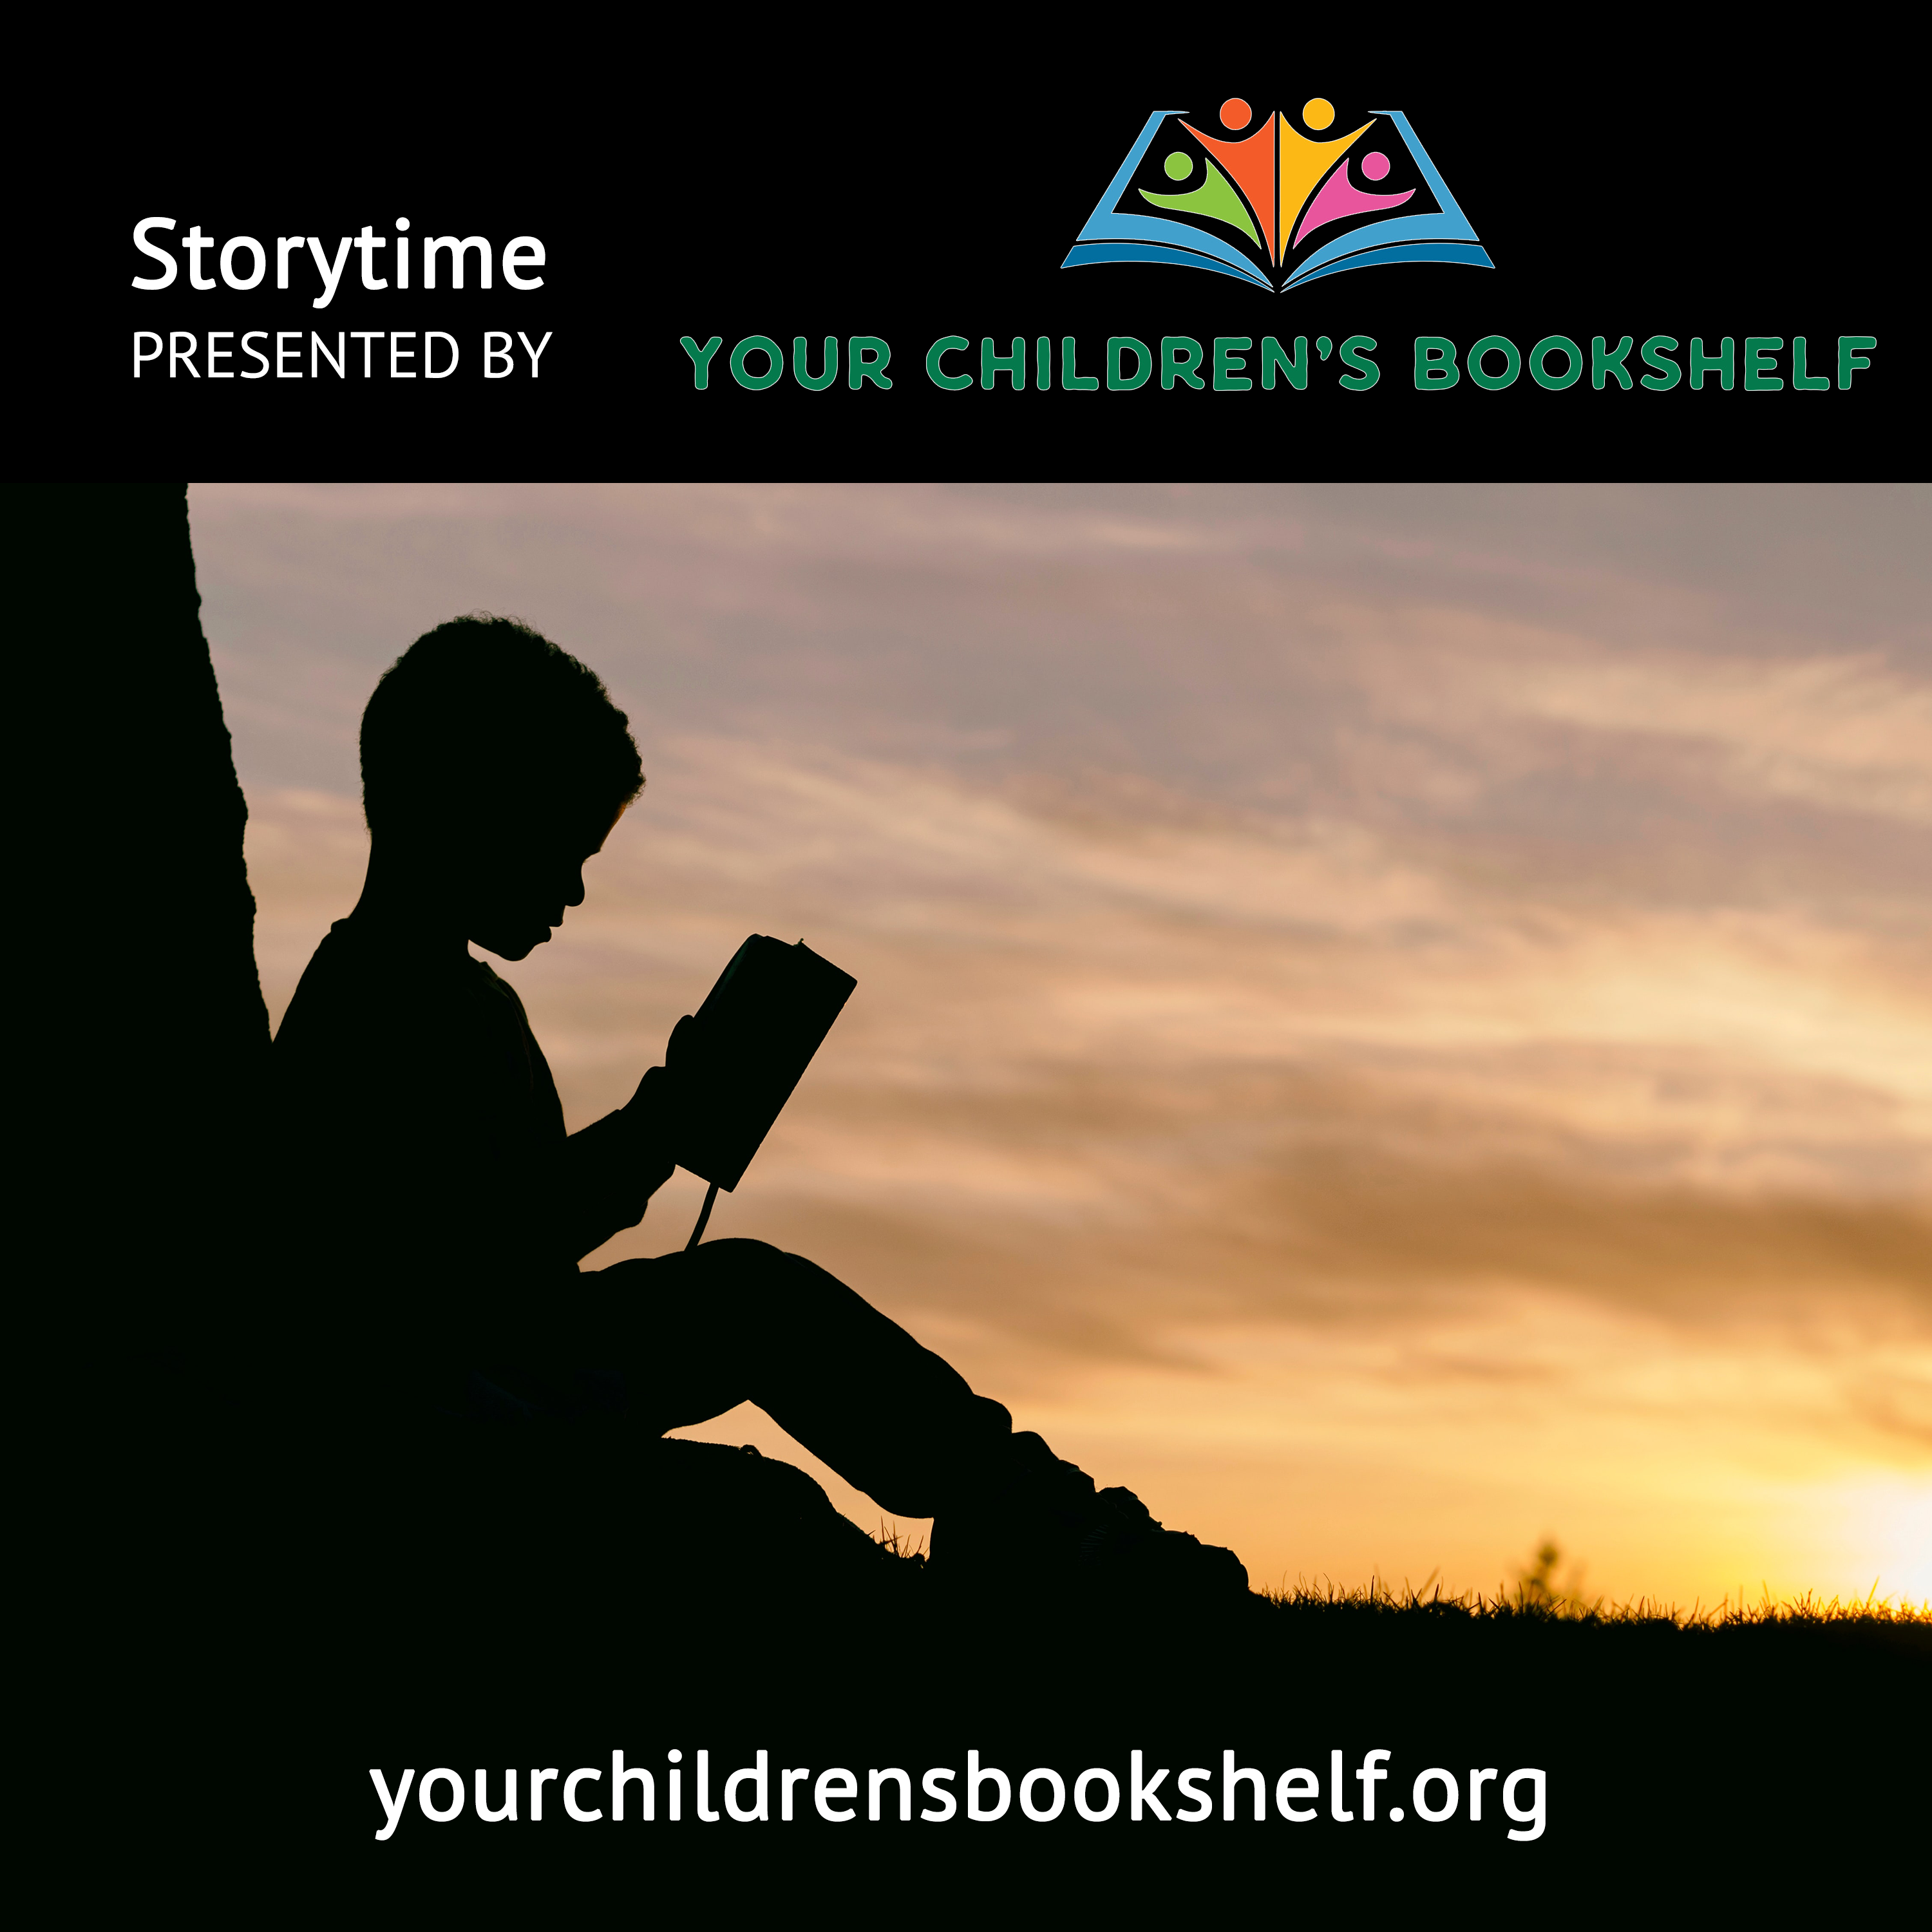 Storytime Presented by Your Children's Bookshelf